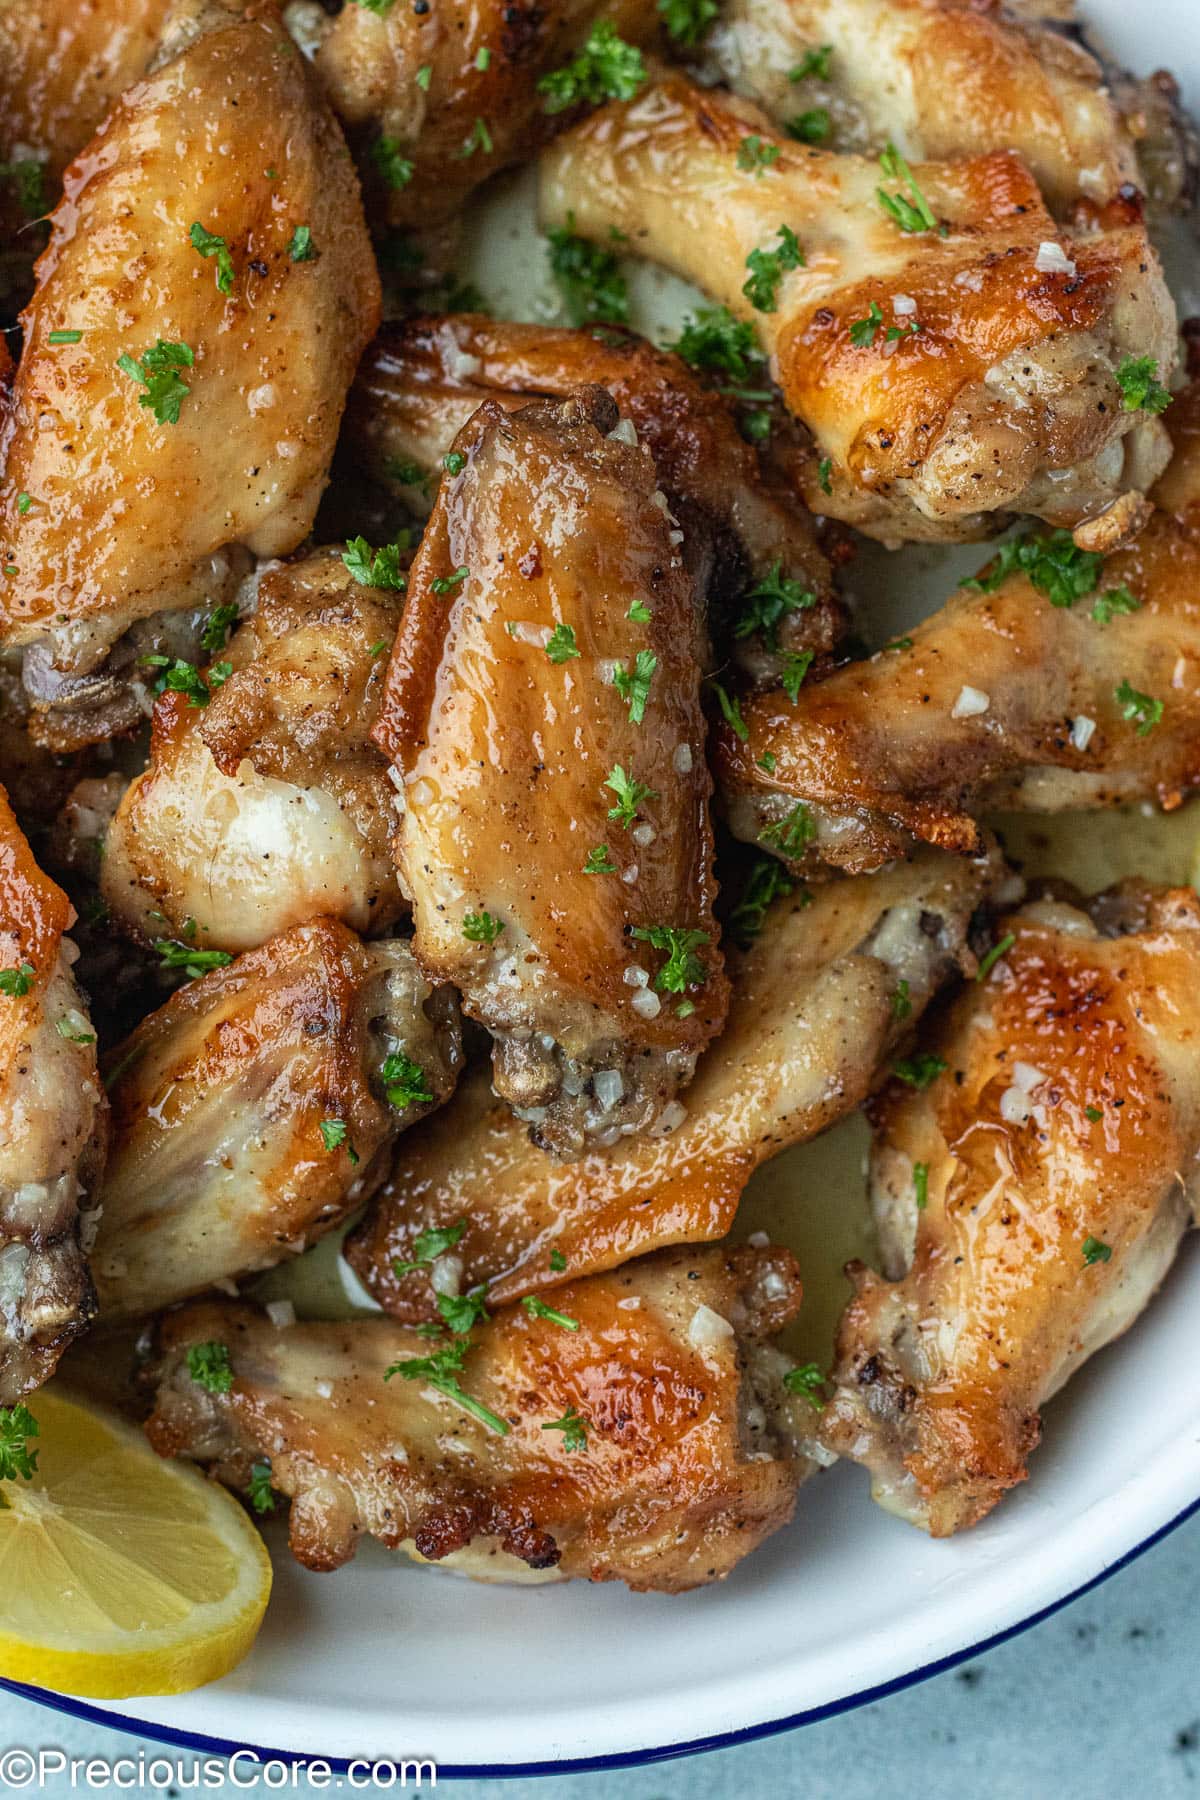 Bowl of chicken wings with garlic butter at the bottom.